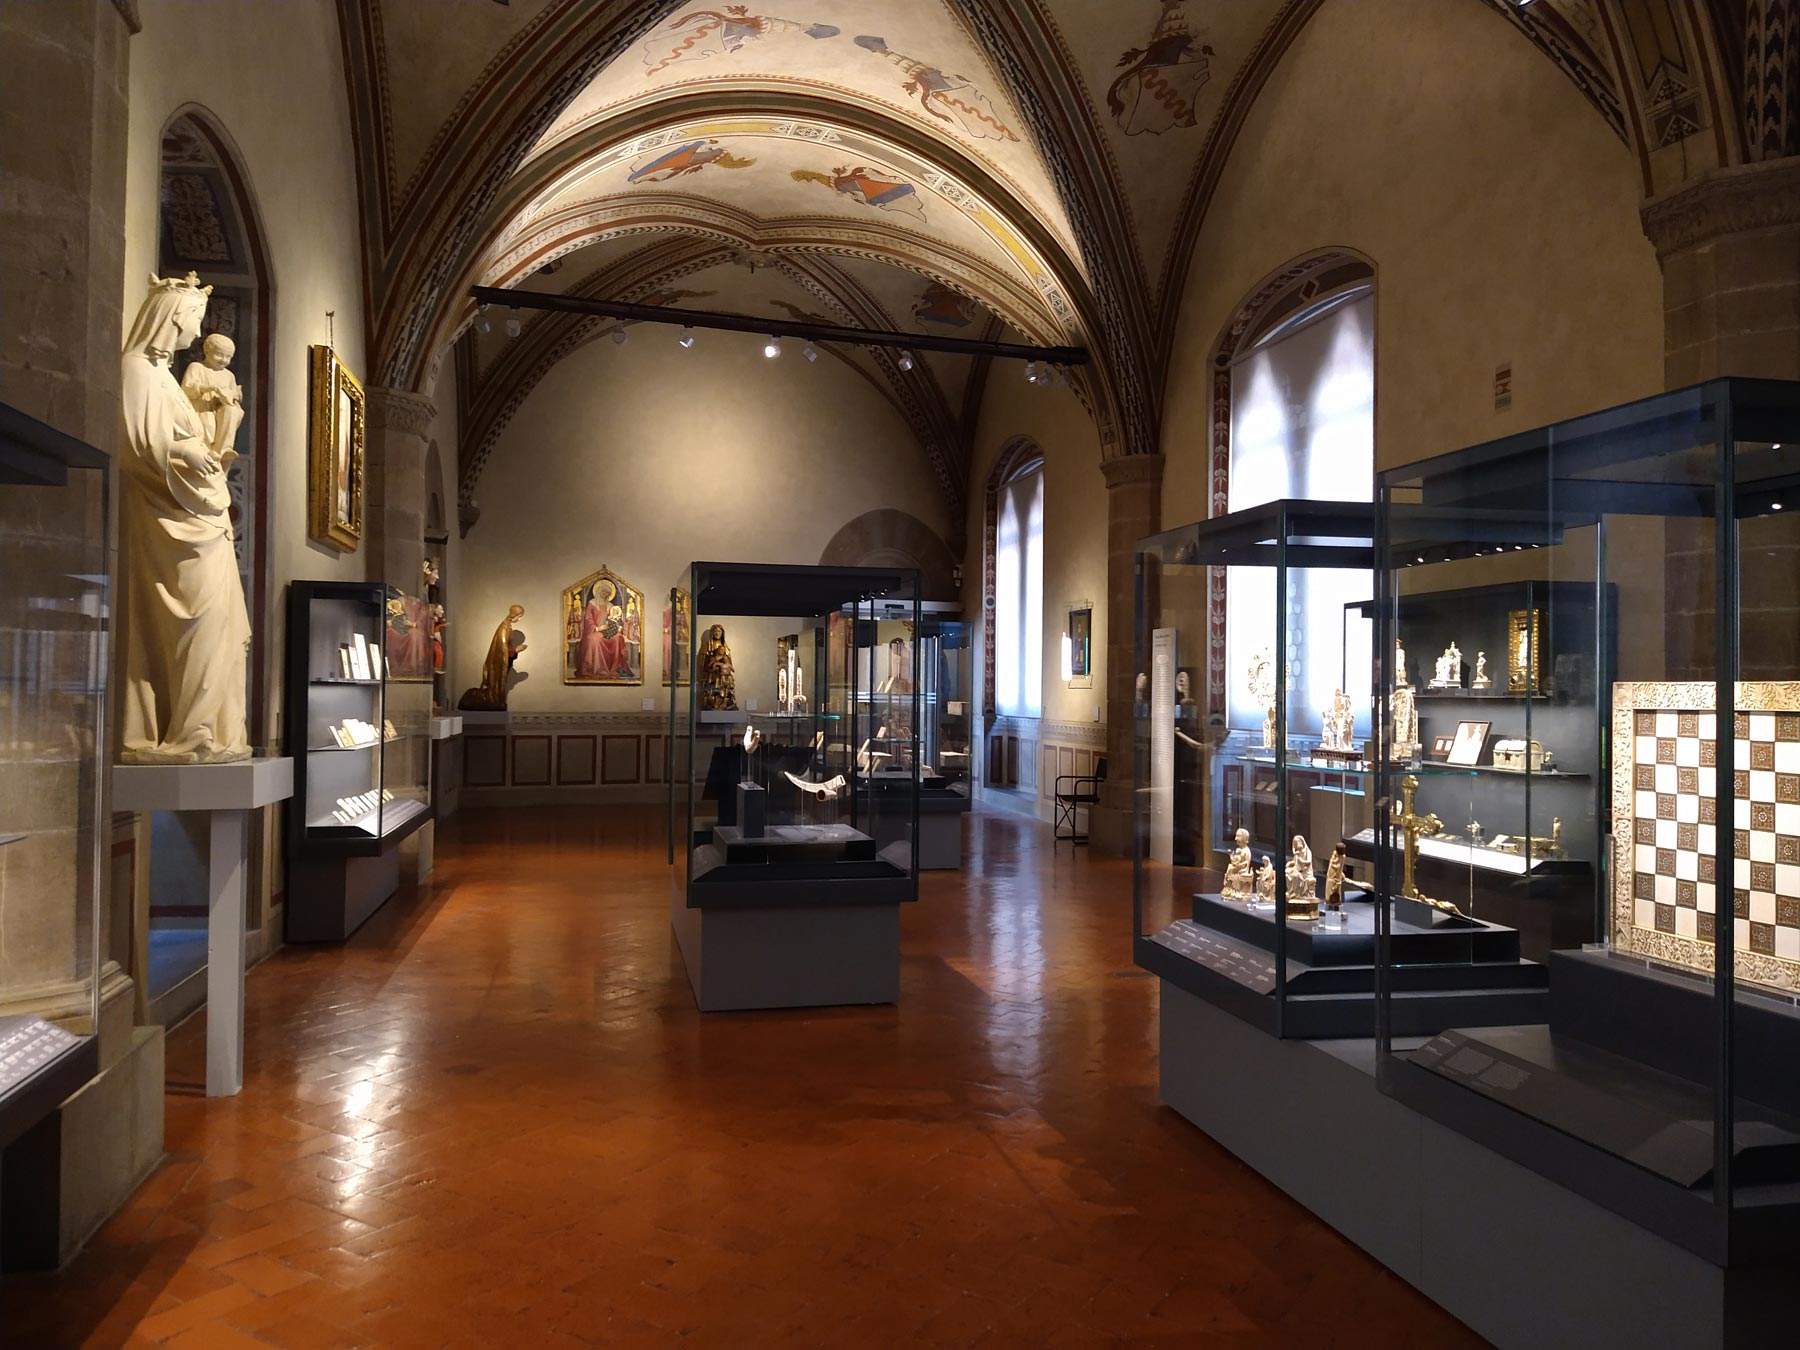 Florence, the Bargello Museum reopens and unveils the new Sala degli Avori, all refurbished